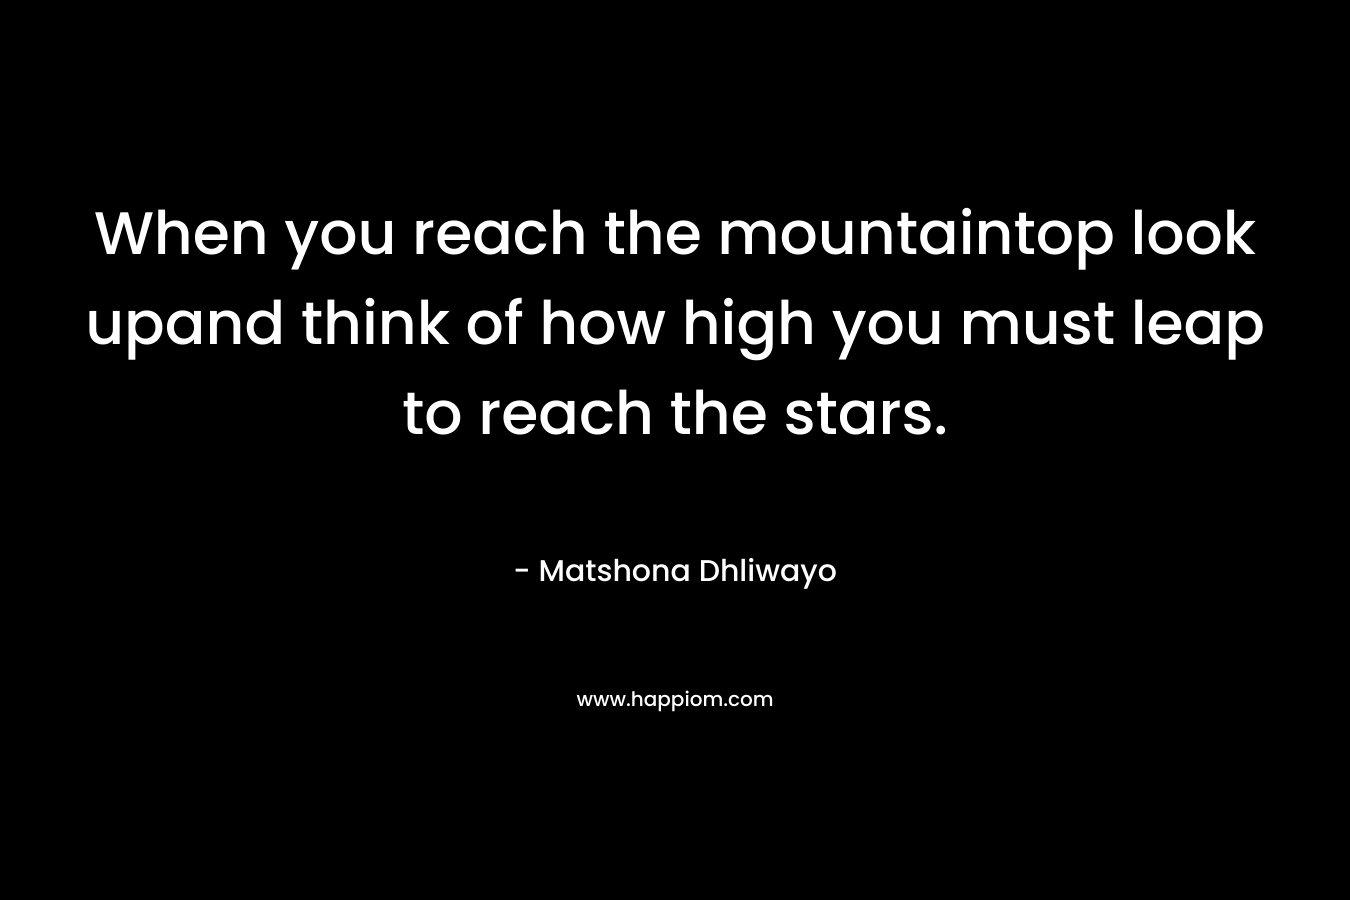 When you reach the mountaintop look upand think of how high you must leap to reach the stars.